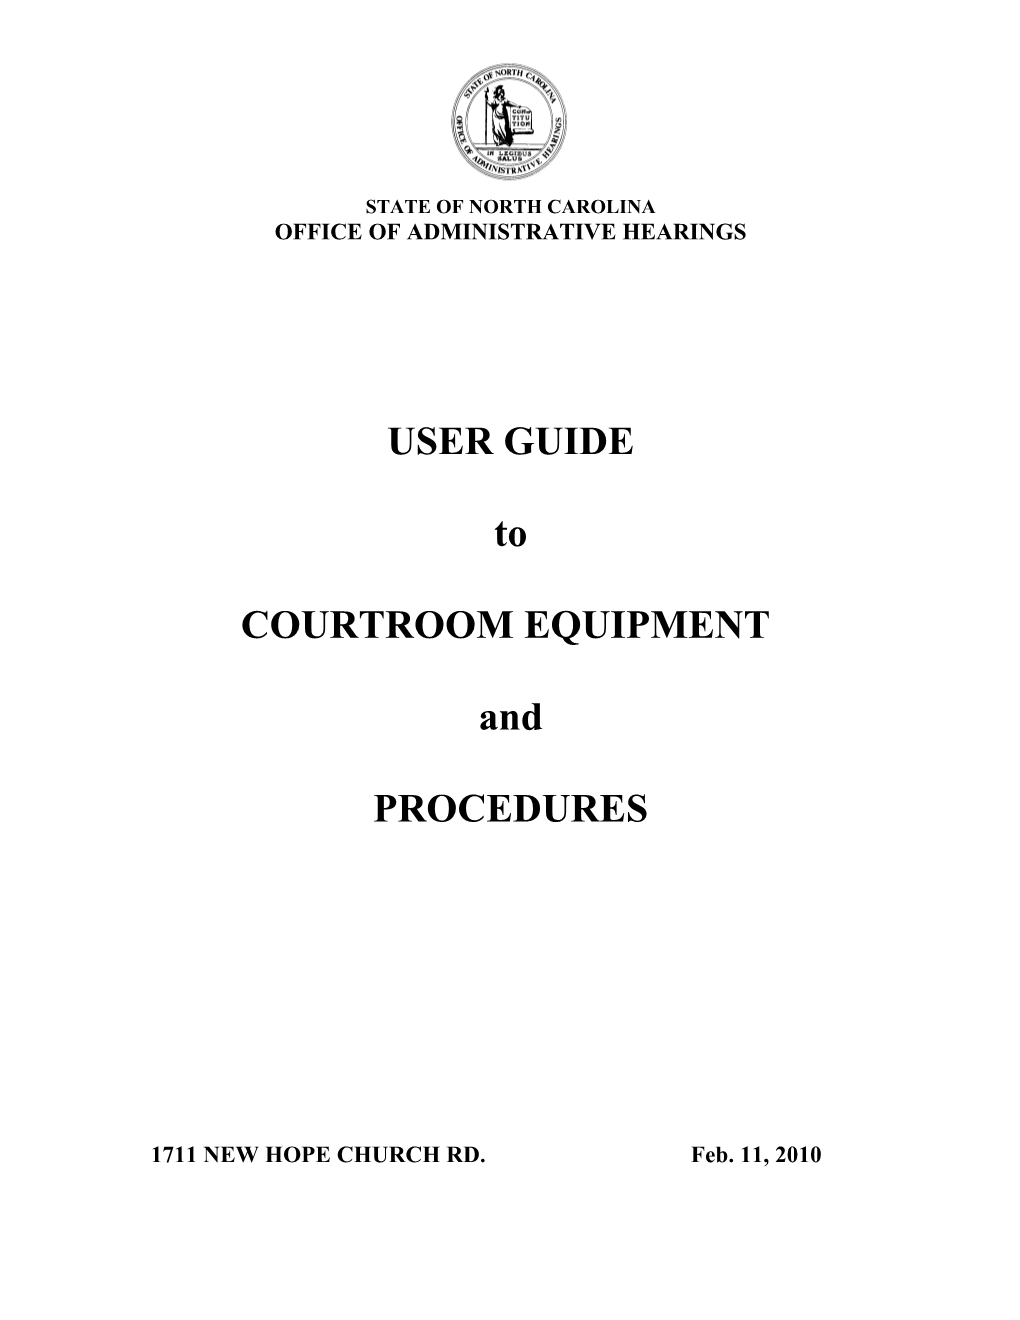 Courtroom Equipment